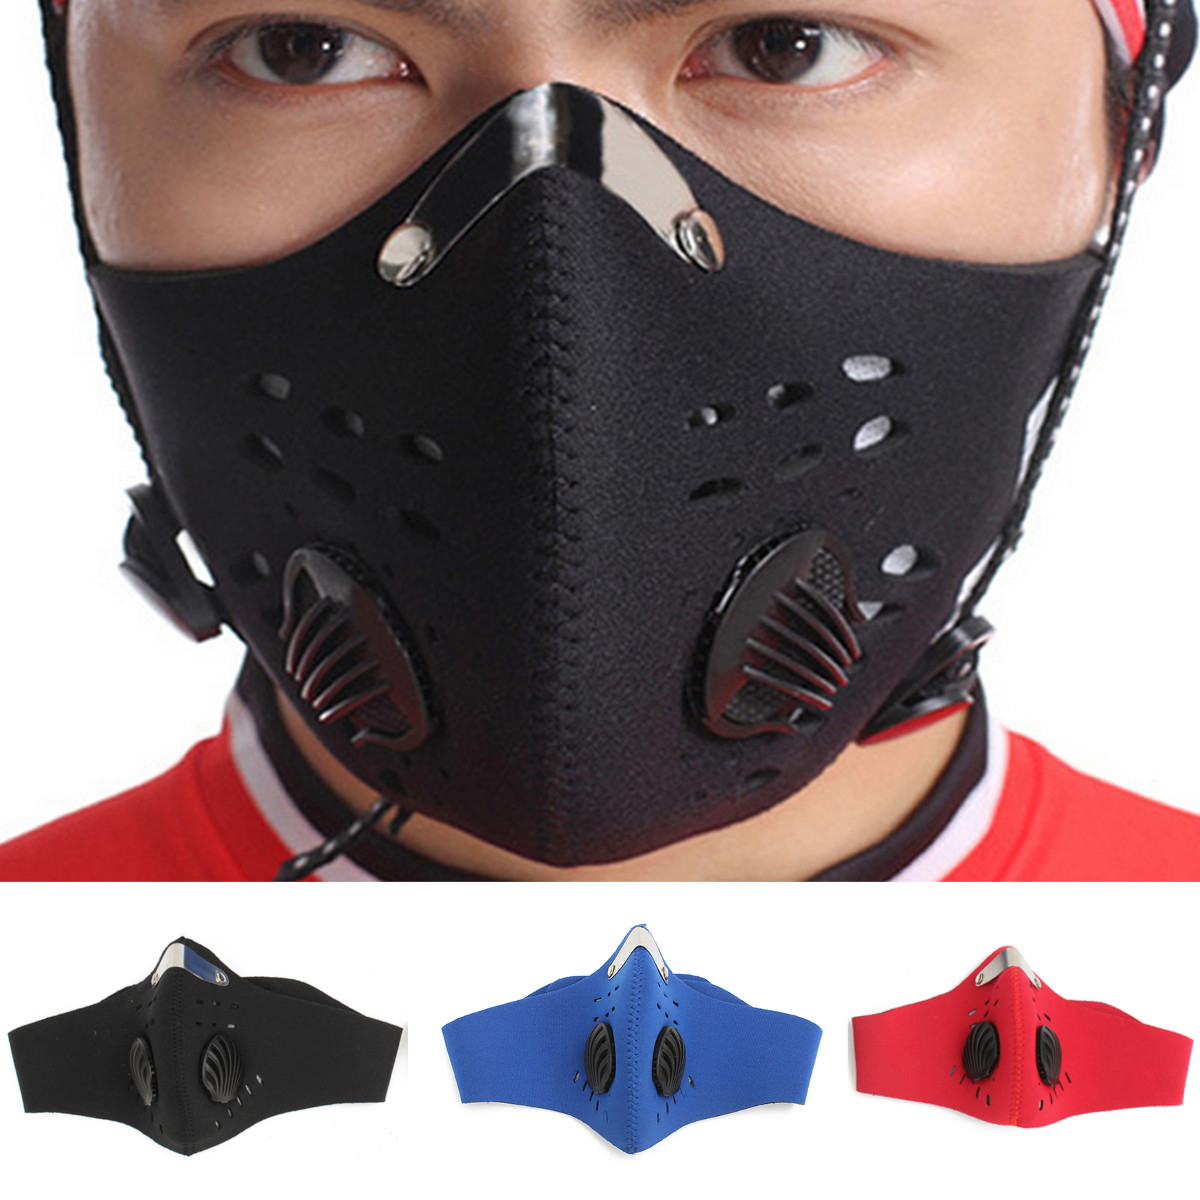 Motorcycle Racing PM2.5 Gas Protection Filter Respirator Dust Face Mask Head 11